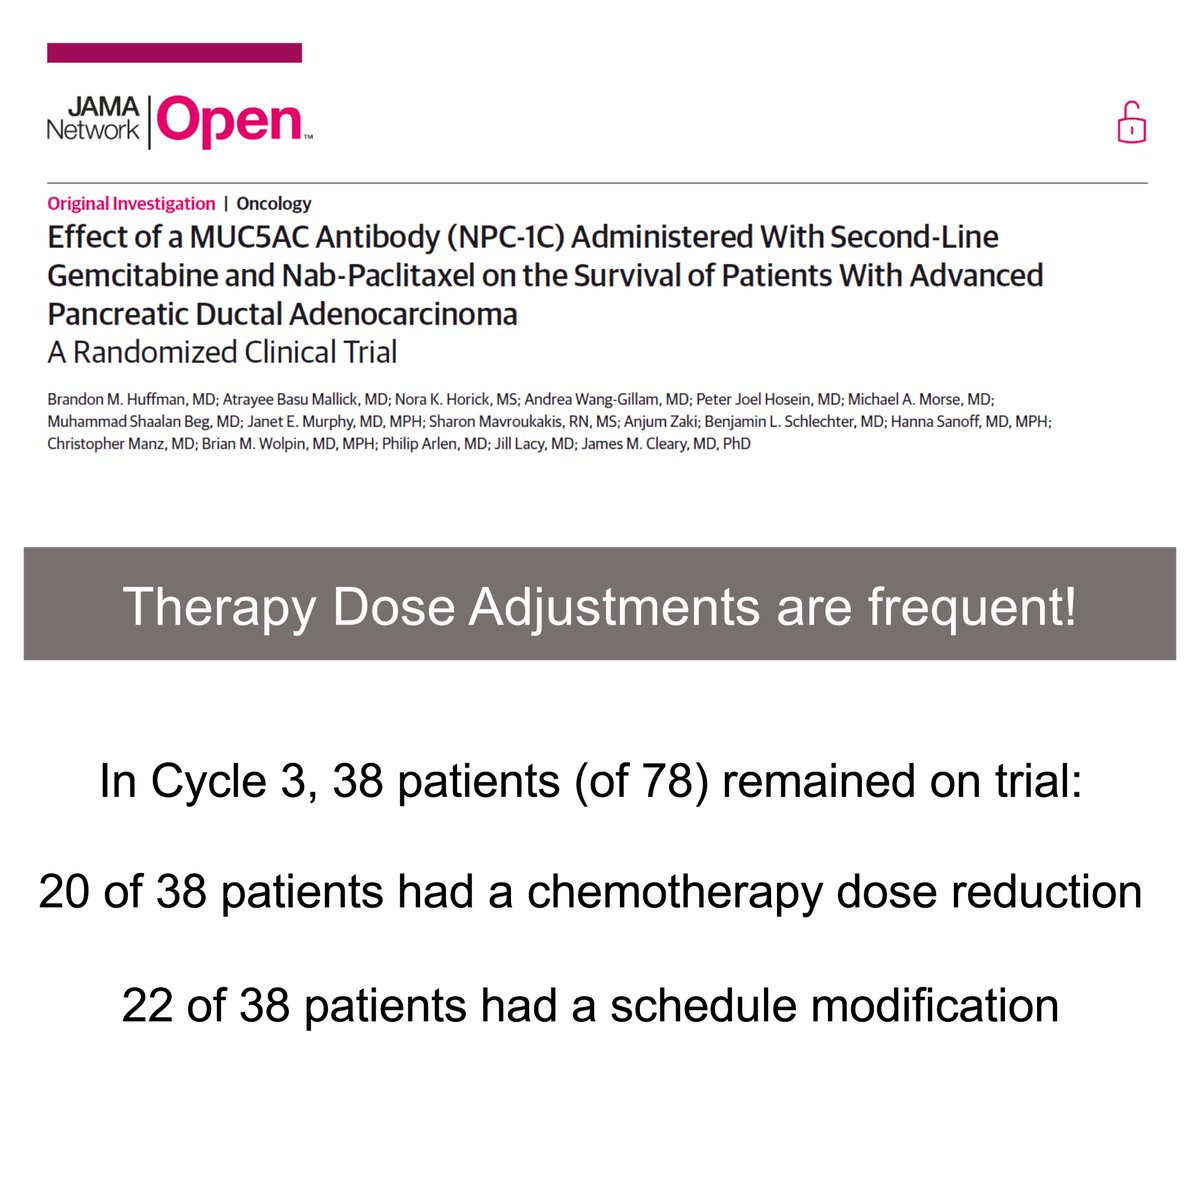 Dose modifications of gem/nab-pac were so common in this 2nd line #PDAC trial. For instance, in the 3rd cycle, 82% of remaining patients had a chemotherapy dose reduction (20/38) and/or schedule modification (22/38). #PancreaticCancer #Pancsm

jamanetwork.com/journals/jaman…